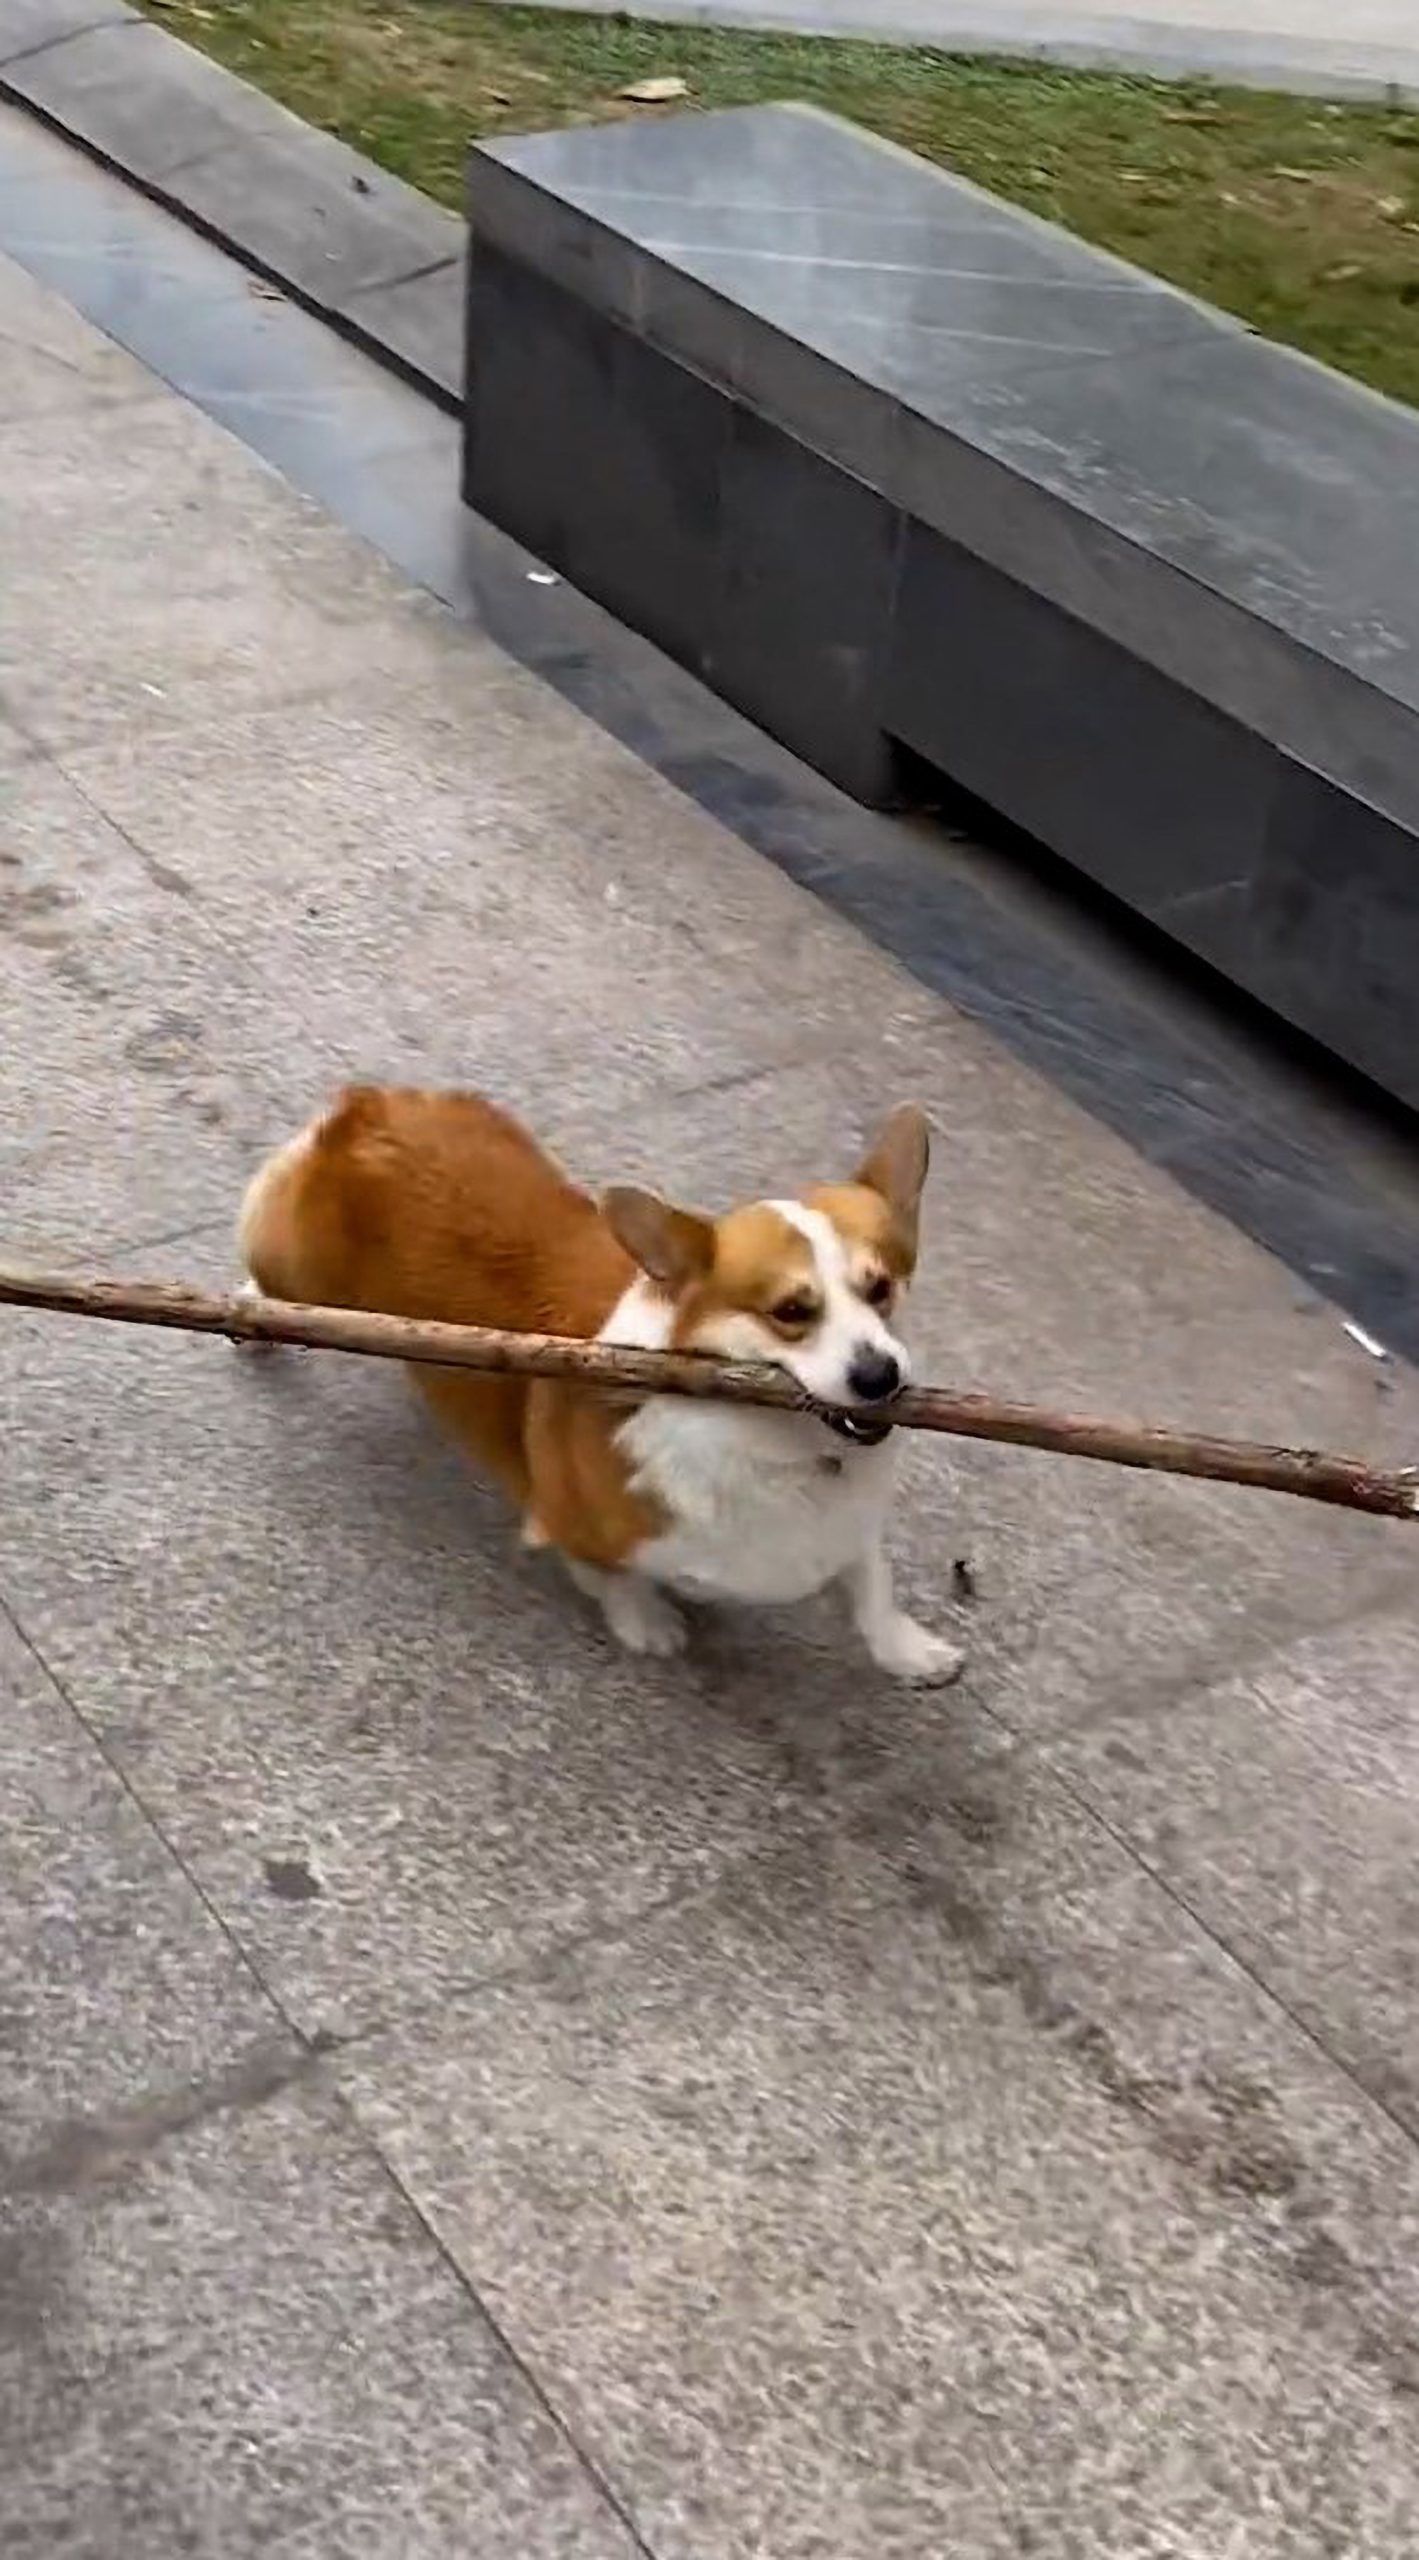 Read more about the article PICKING UP STICKS: Nest Building Corgi That Collects Long Wooden Poles Is An Online Hit